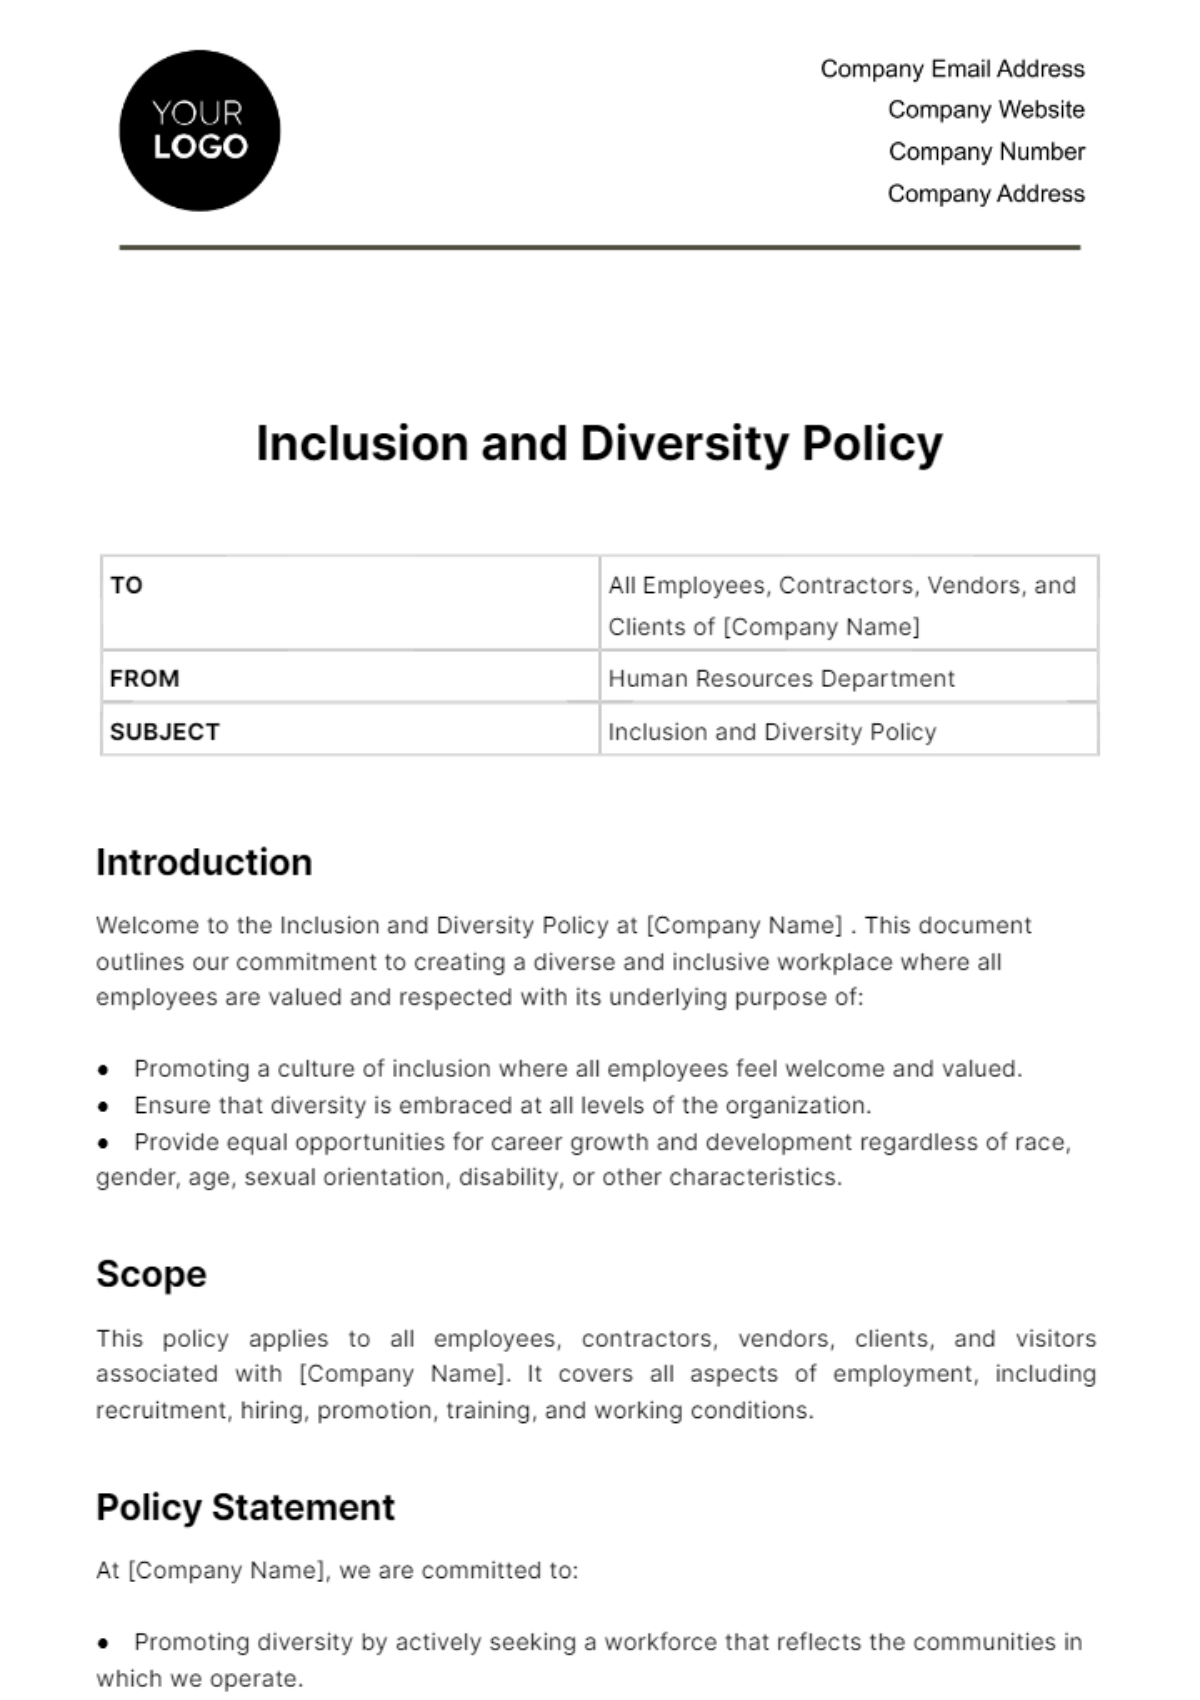 Inclusion and Diversity Policy HR Template